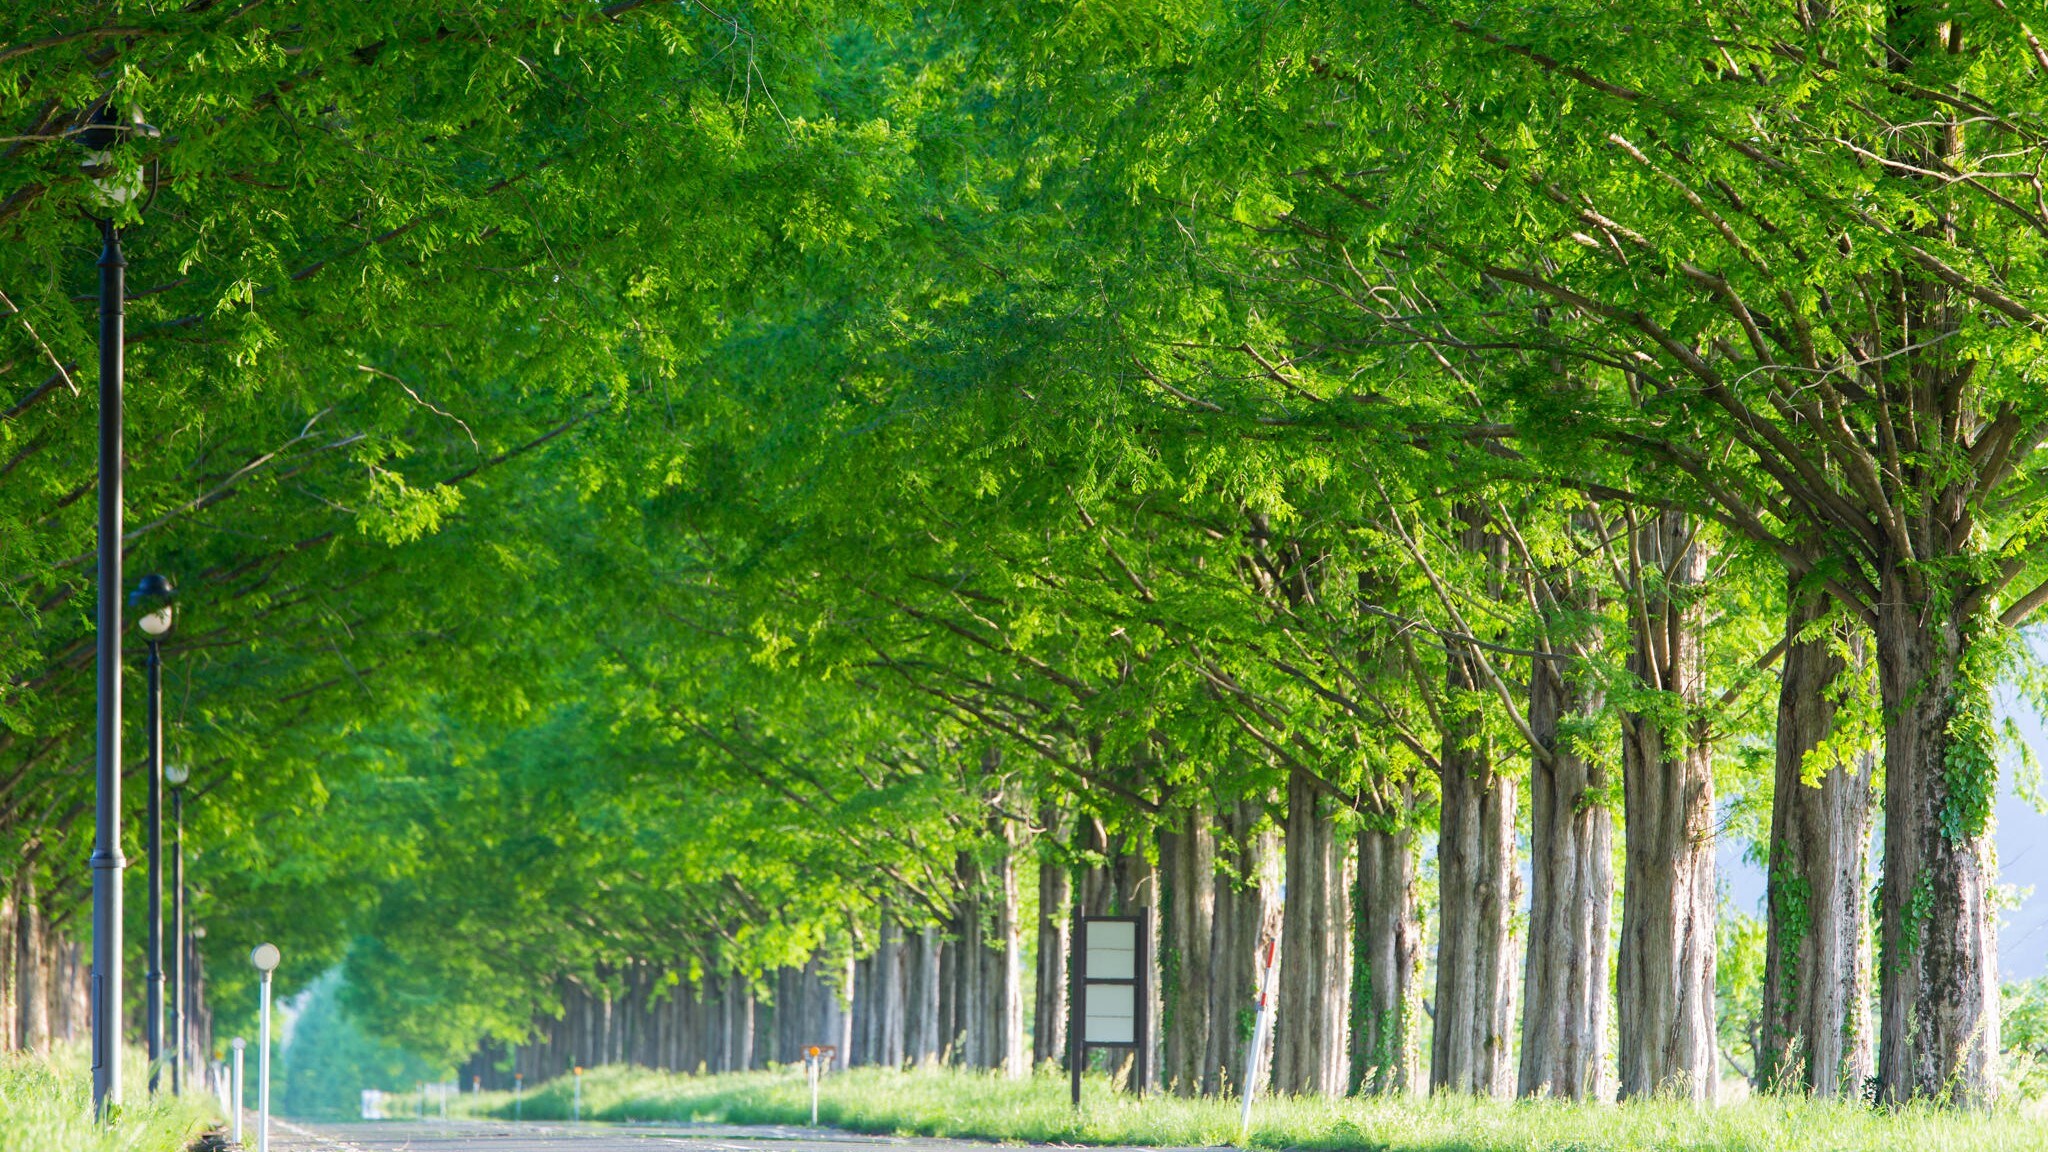 A row of Metasequoia trees